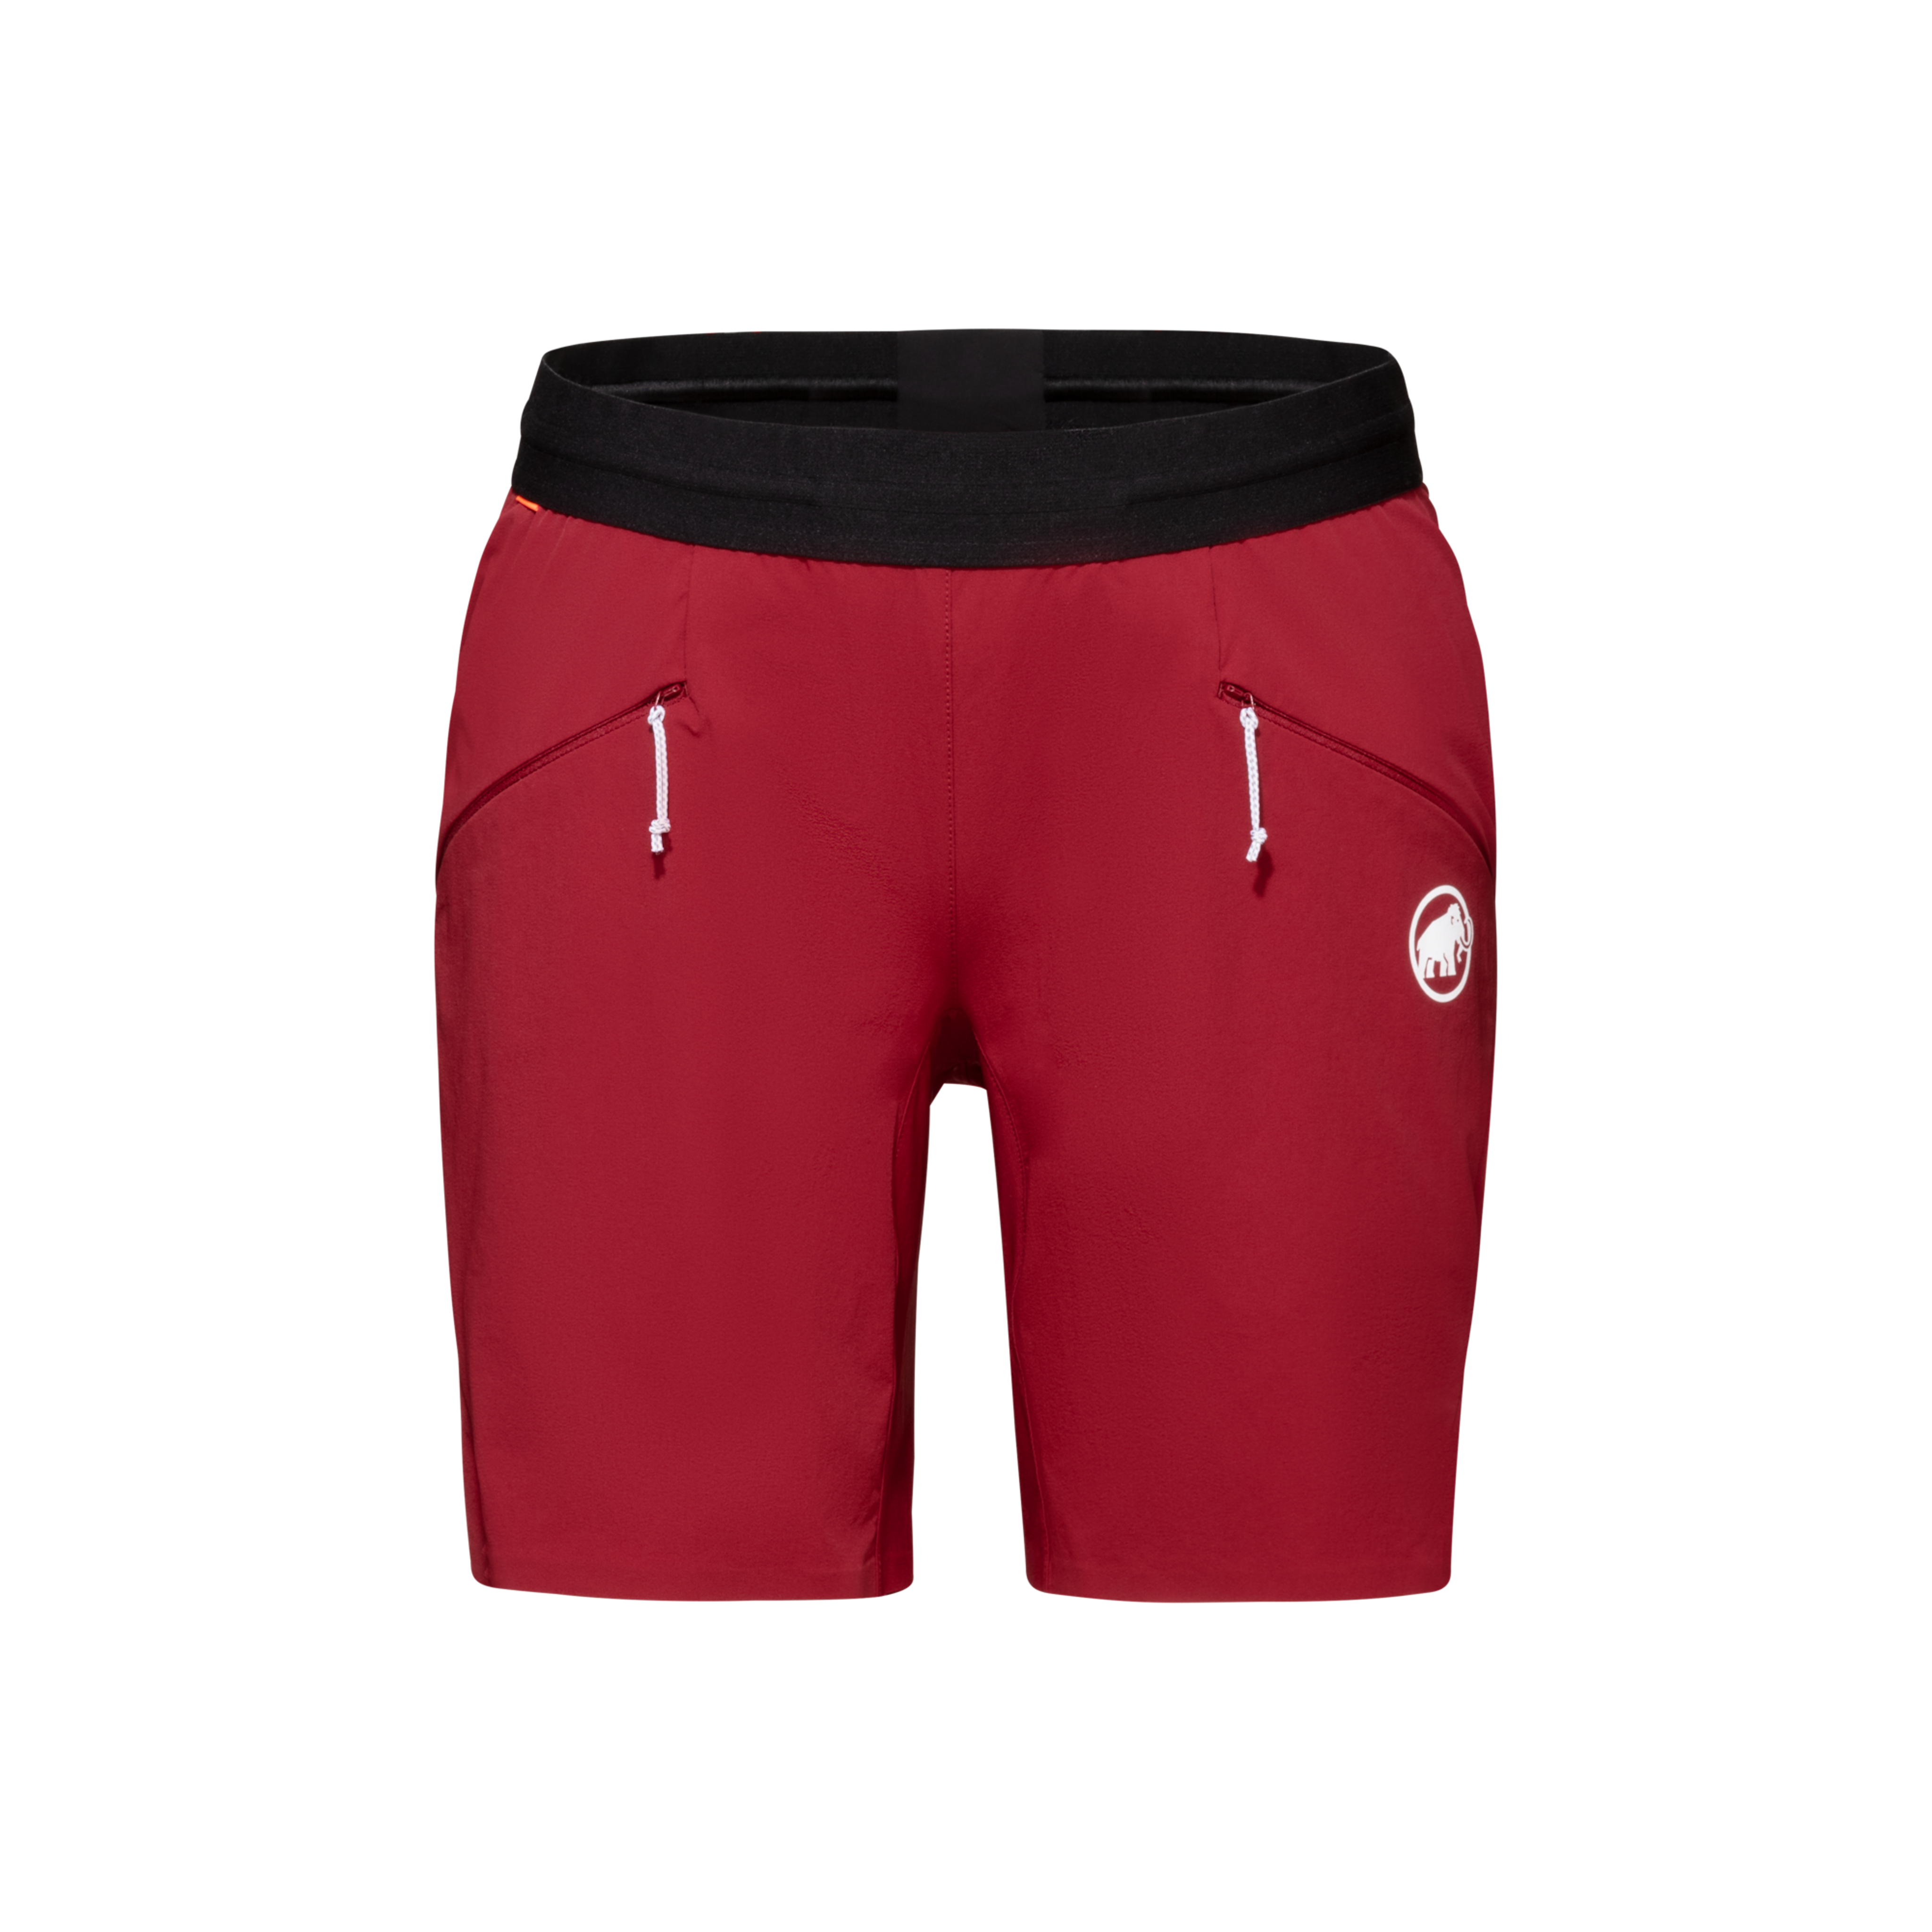 Mammut shorts in red for women